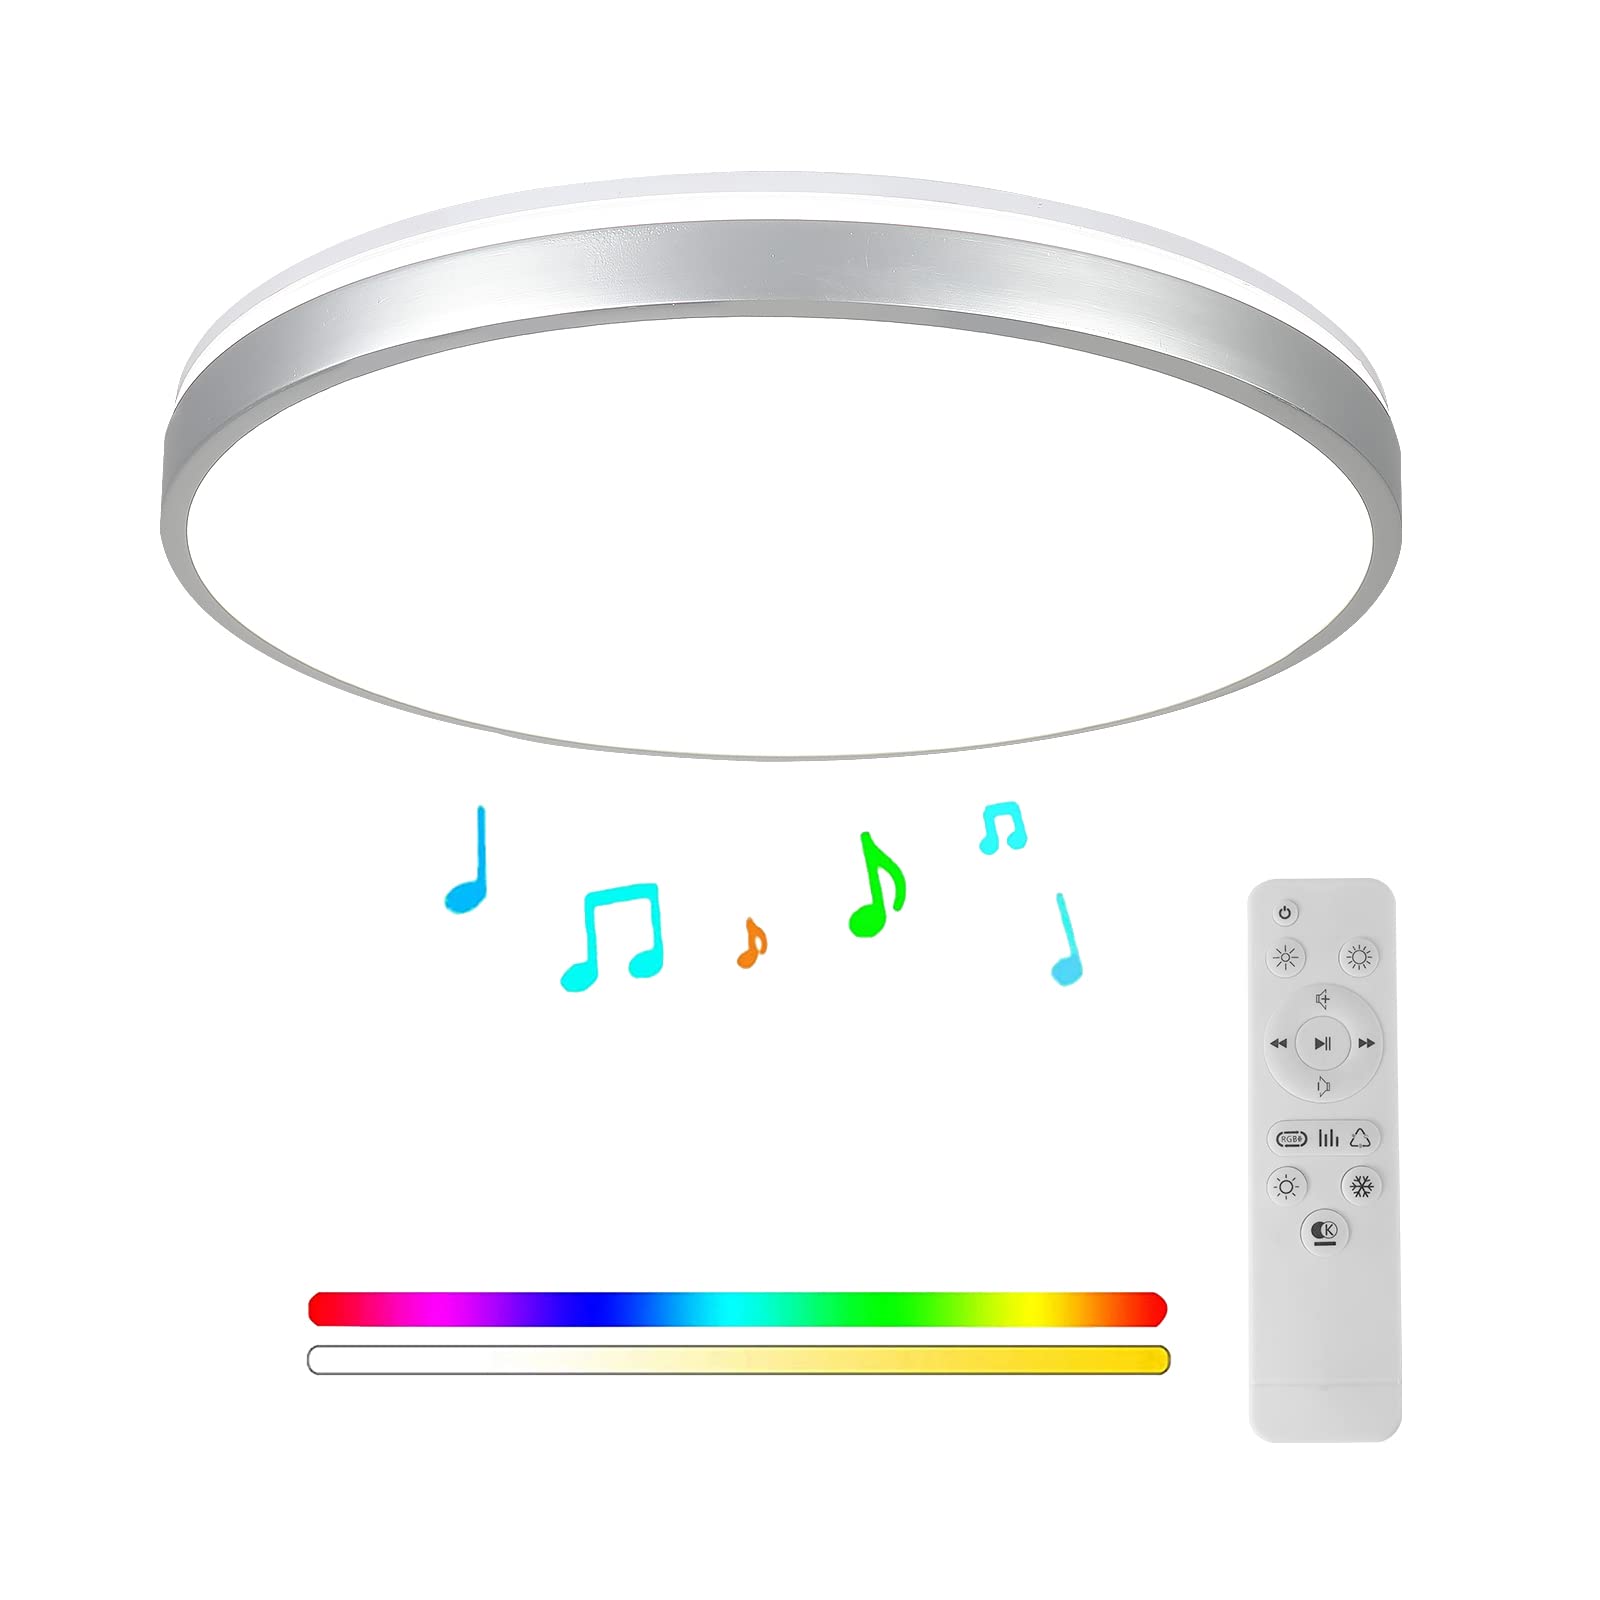 HOREVO Brushed Nickel Ceiling Light with Remote Control with Bluetooth Speaker, 24W Diammble Color Changing, LED Flush Mount Silver Light Fixture for Bedroom, Living Room, Bathroon, Kitchen